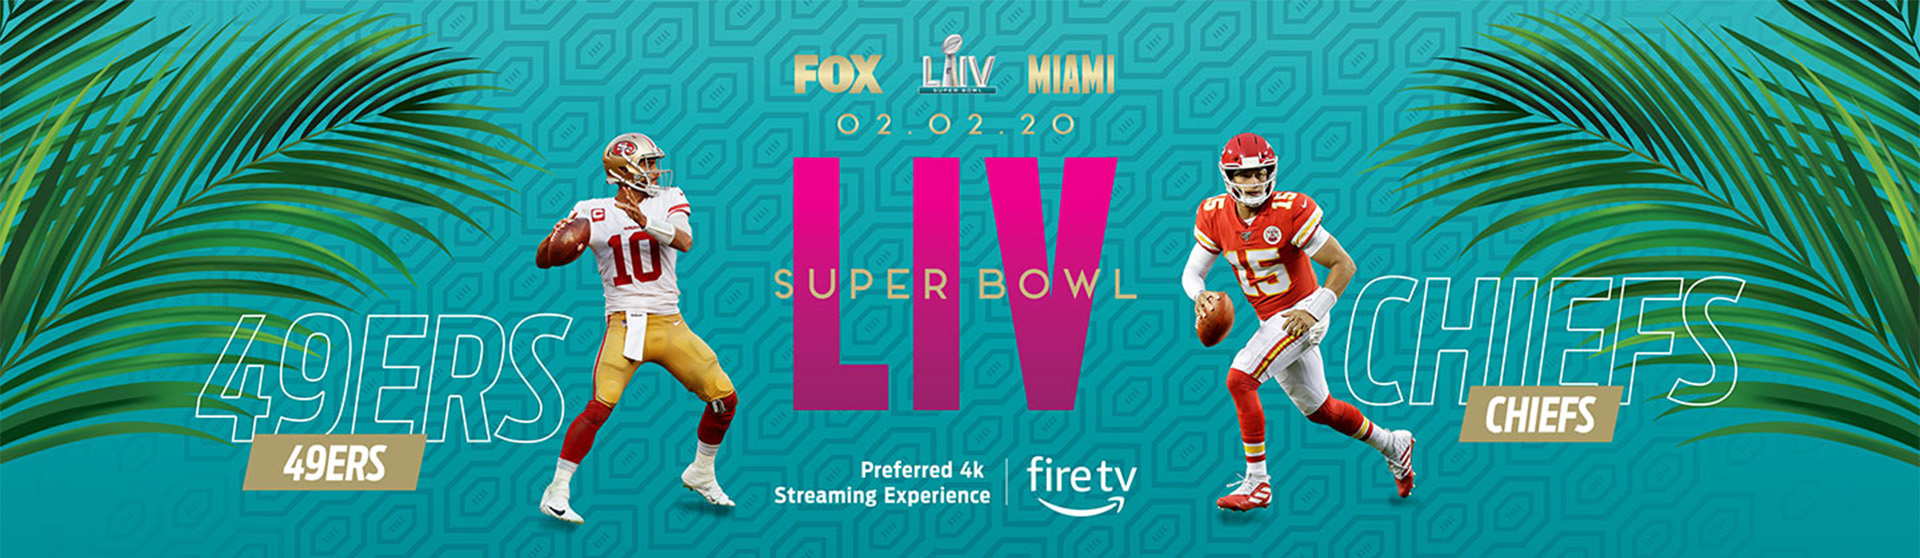 super bowl how to watch free